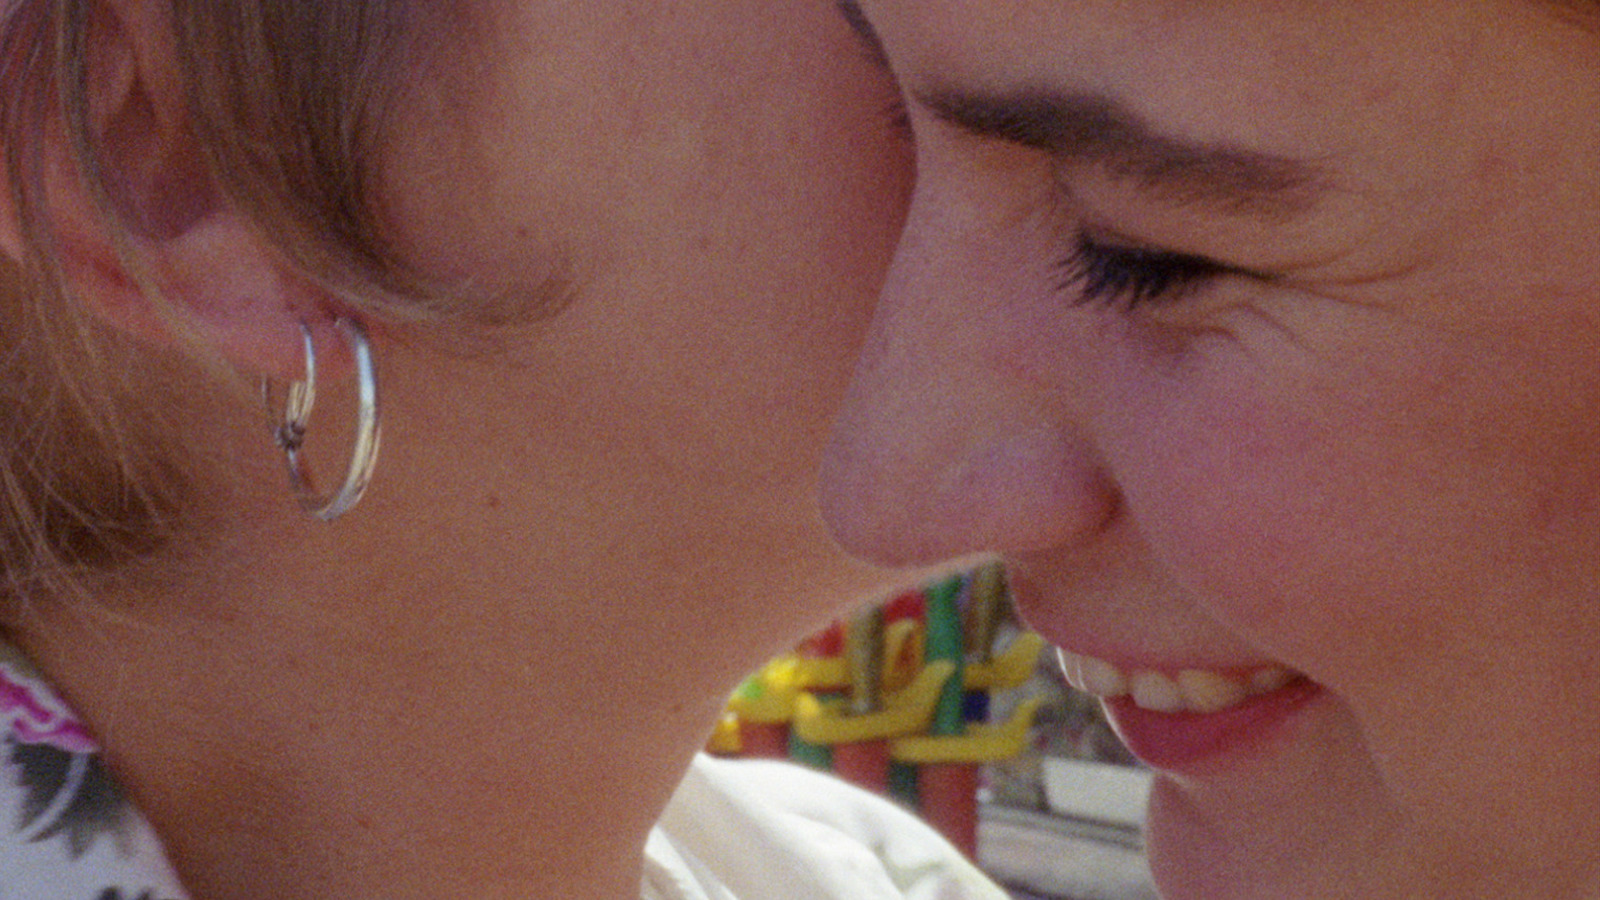 Extreme closeup of a woman whispering in another's ear in profile